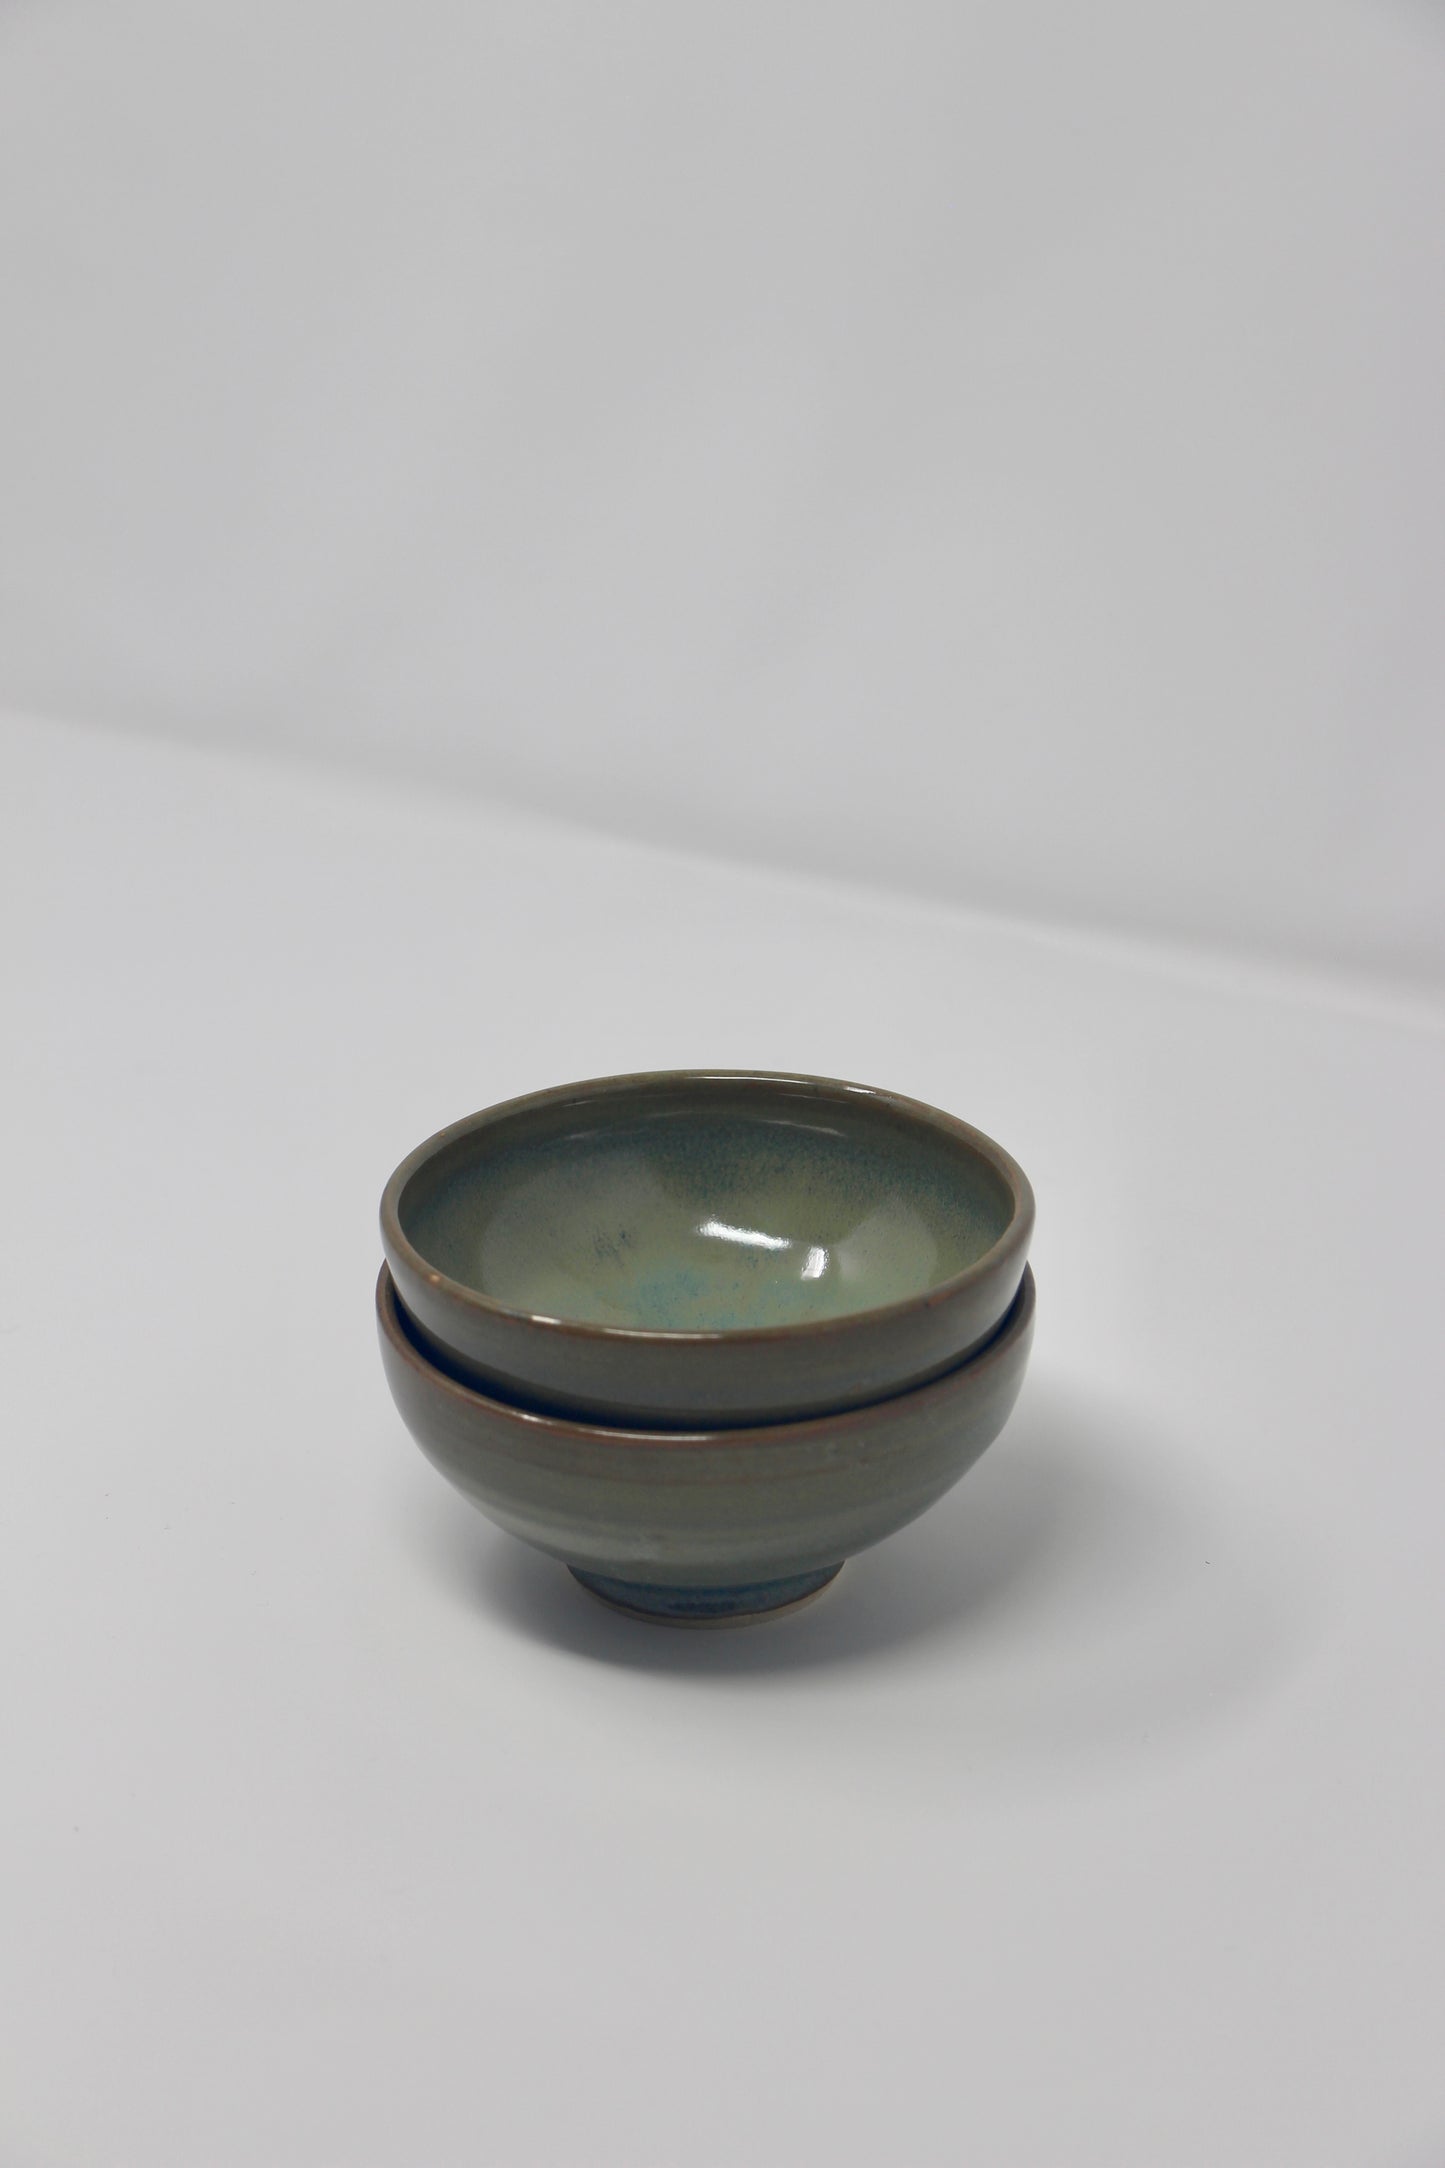 Pair of Little Bowls, Coppernican Sky